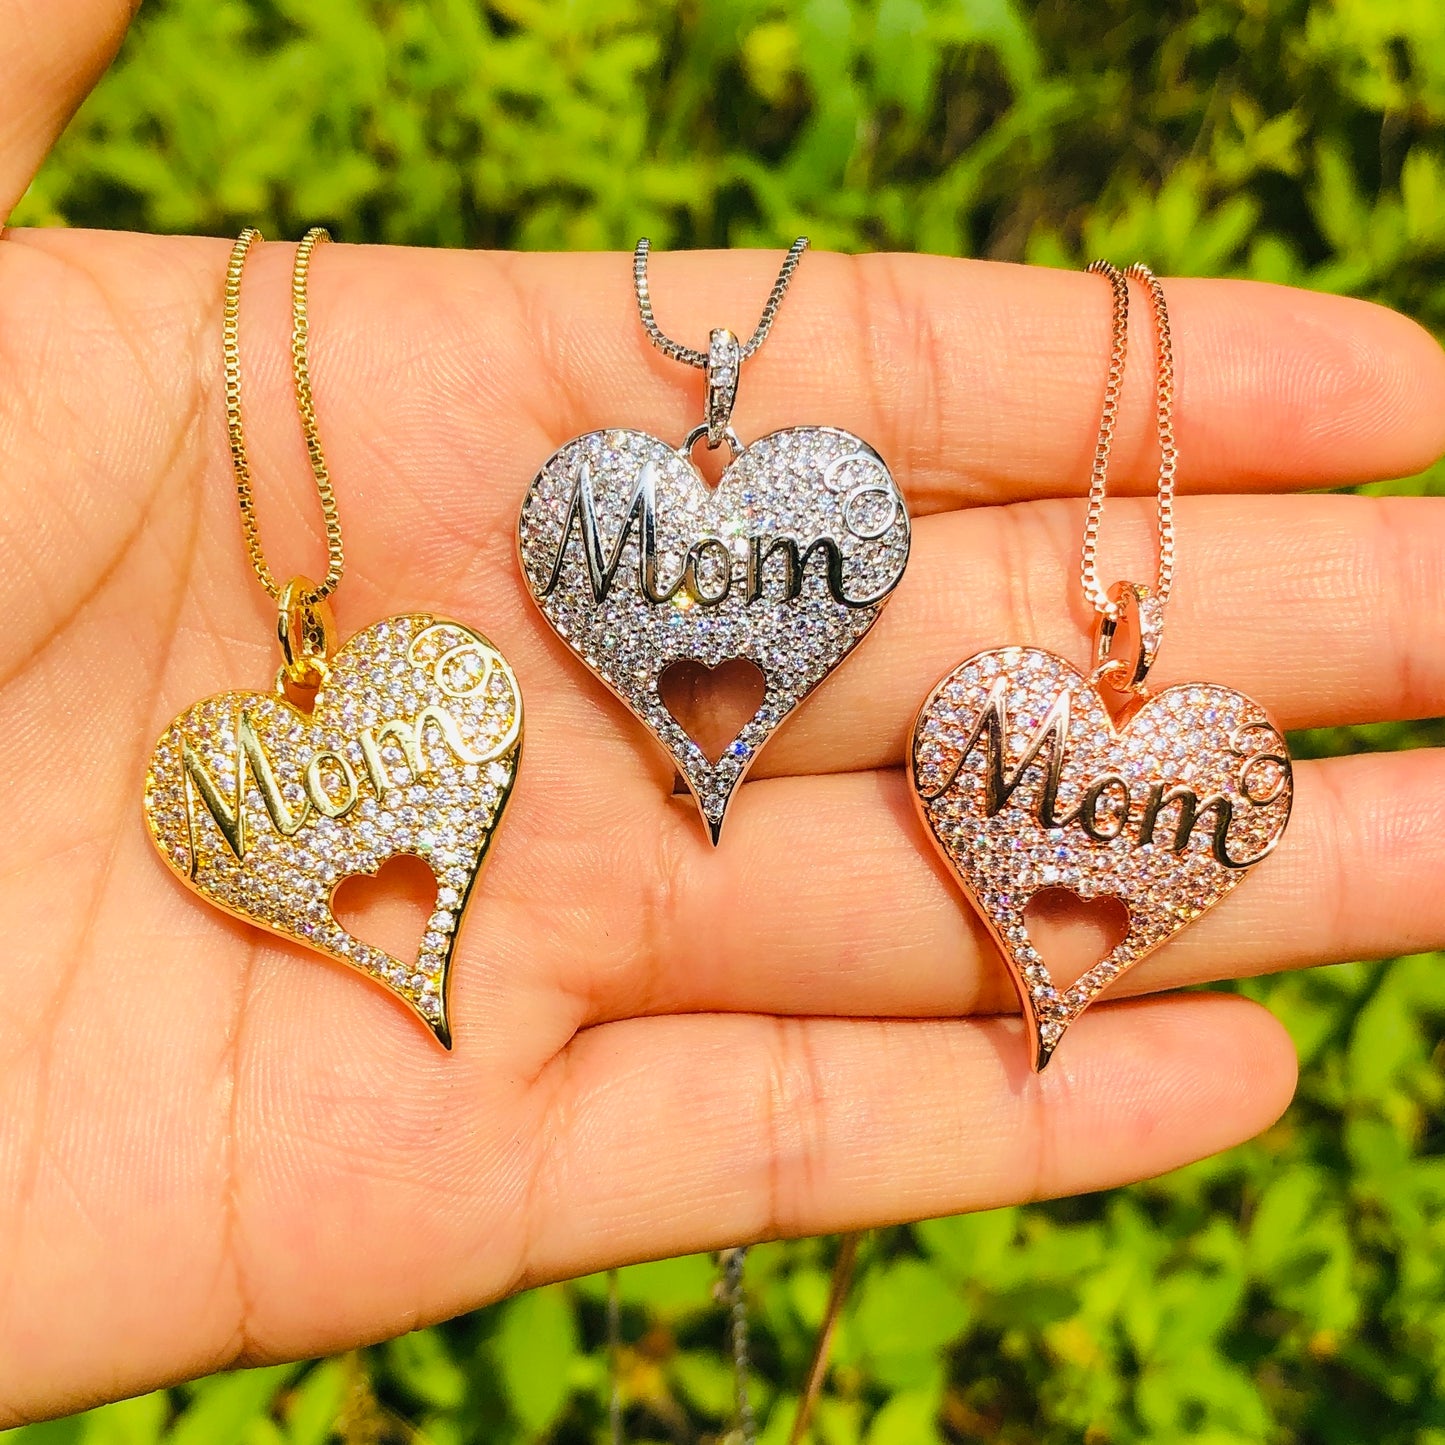 5pcs/lot 26*24.5mm CZ Paved Mom Necklaces Mix Colors Necklaces Mother's Day Charms Beads Beyond